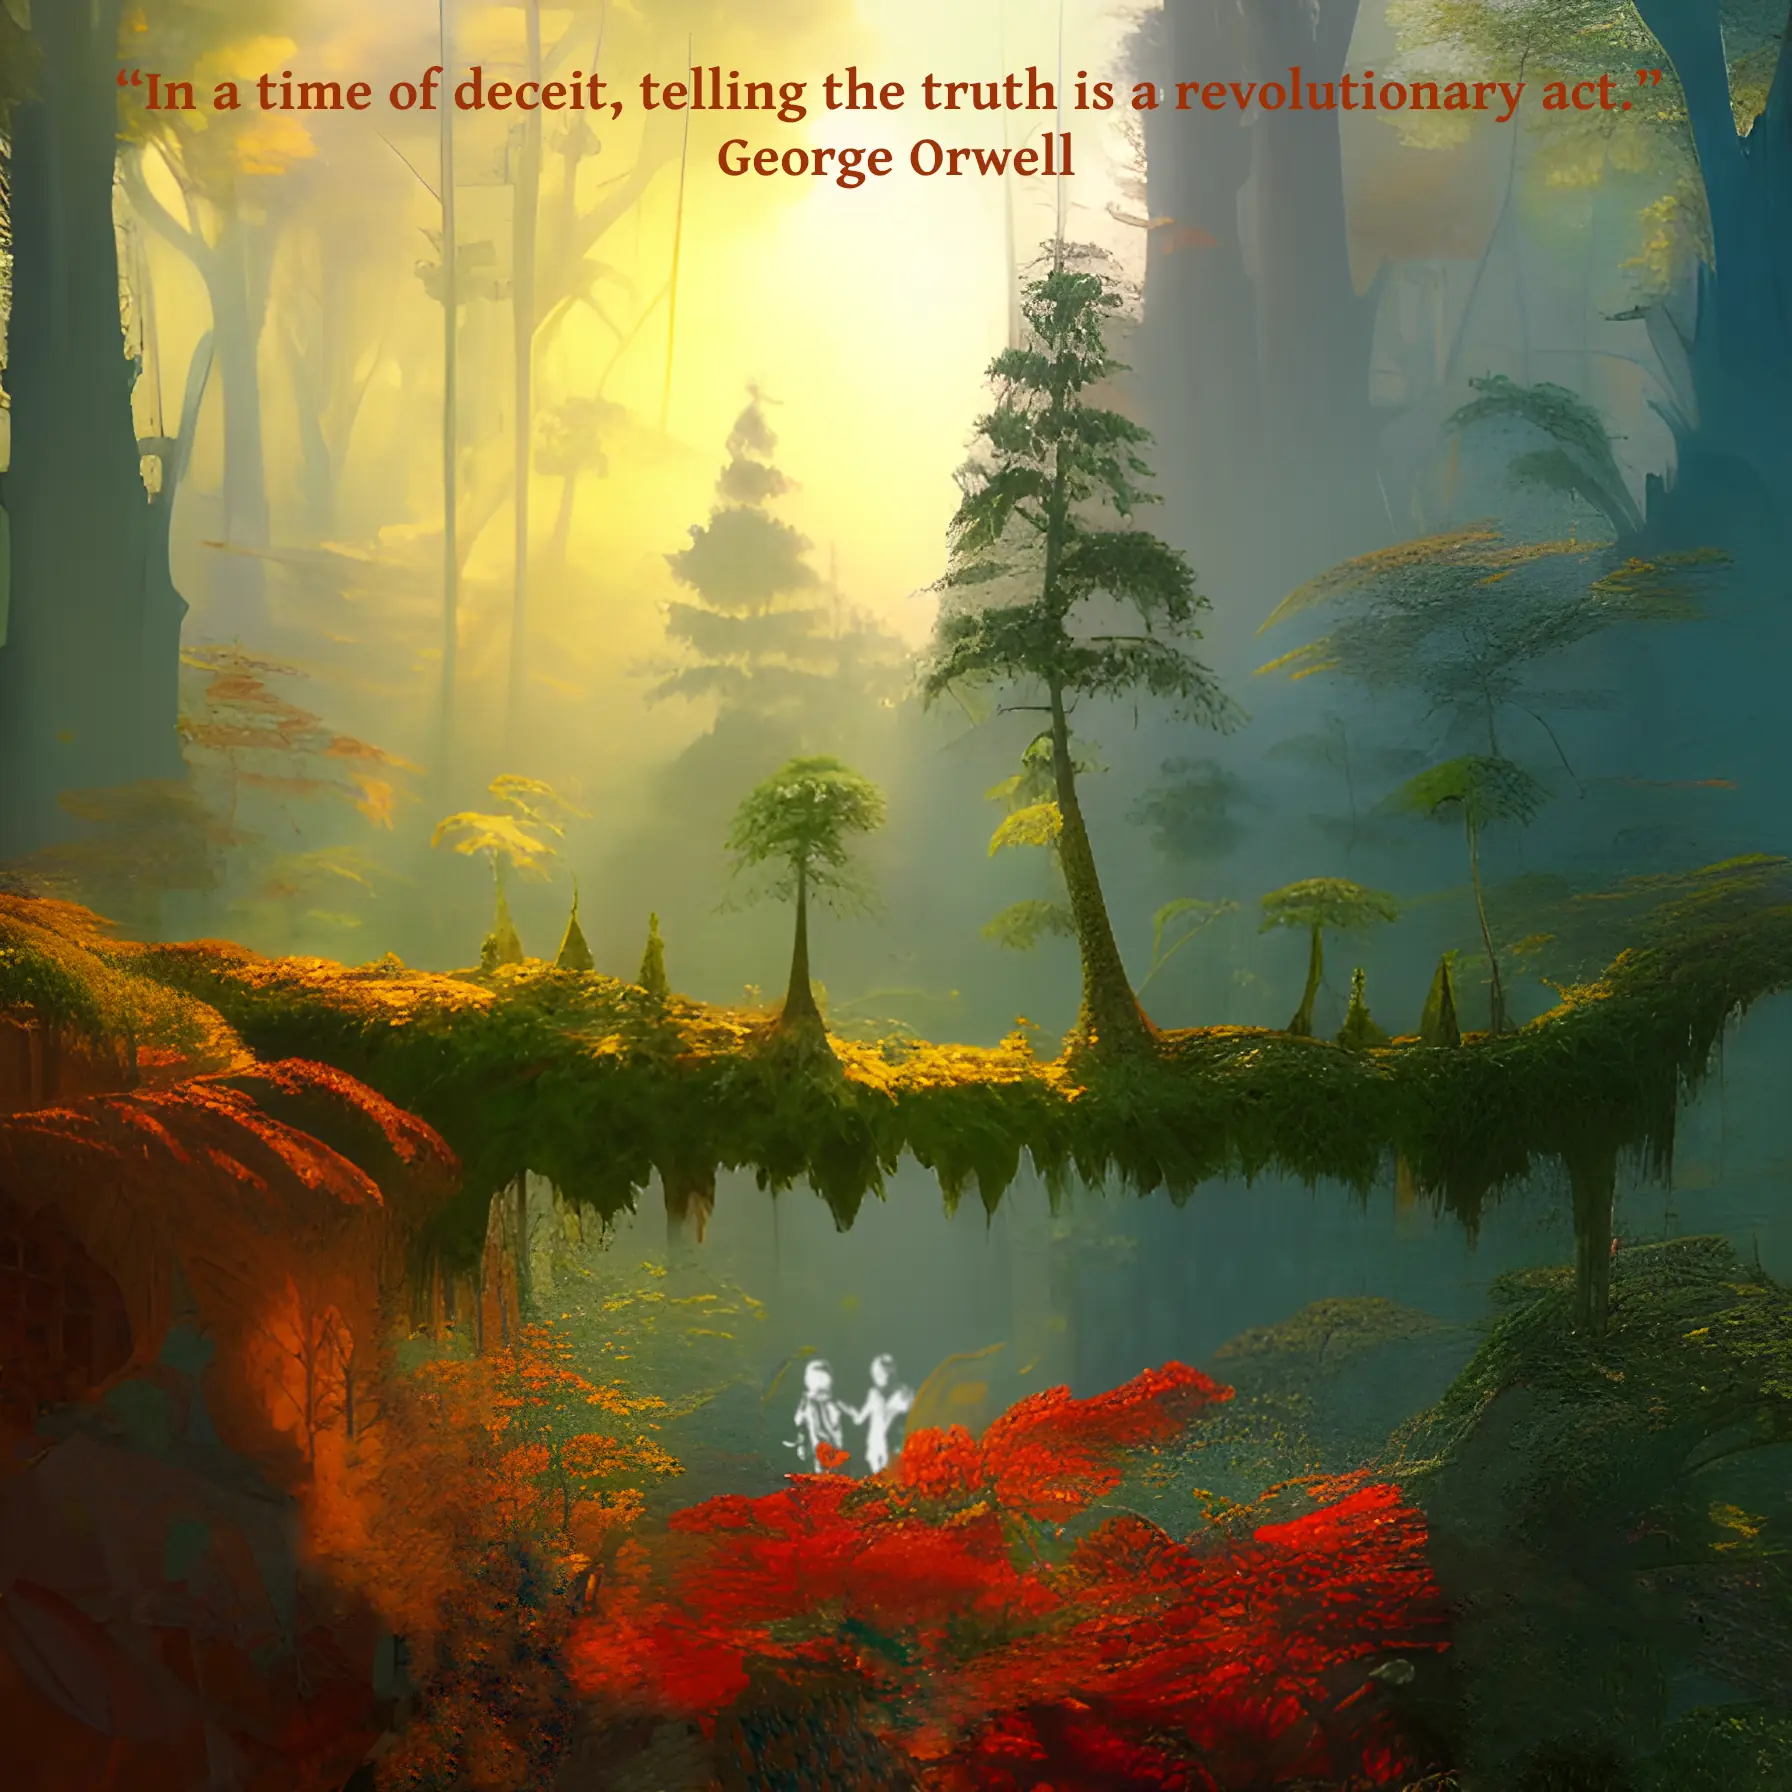 An artistic rendering of a forest. There is an overgrown bridge in the middle of the image that has trees growing up from it. A quote reads: “In a time of deceit, telling the truth is a revolutionary act.” - George Orwell